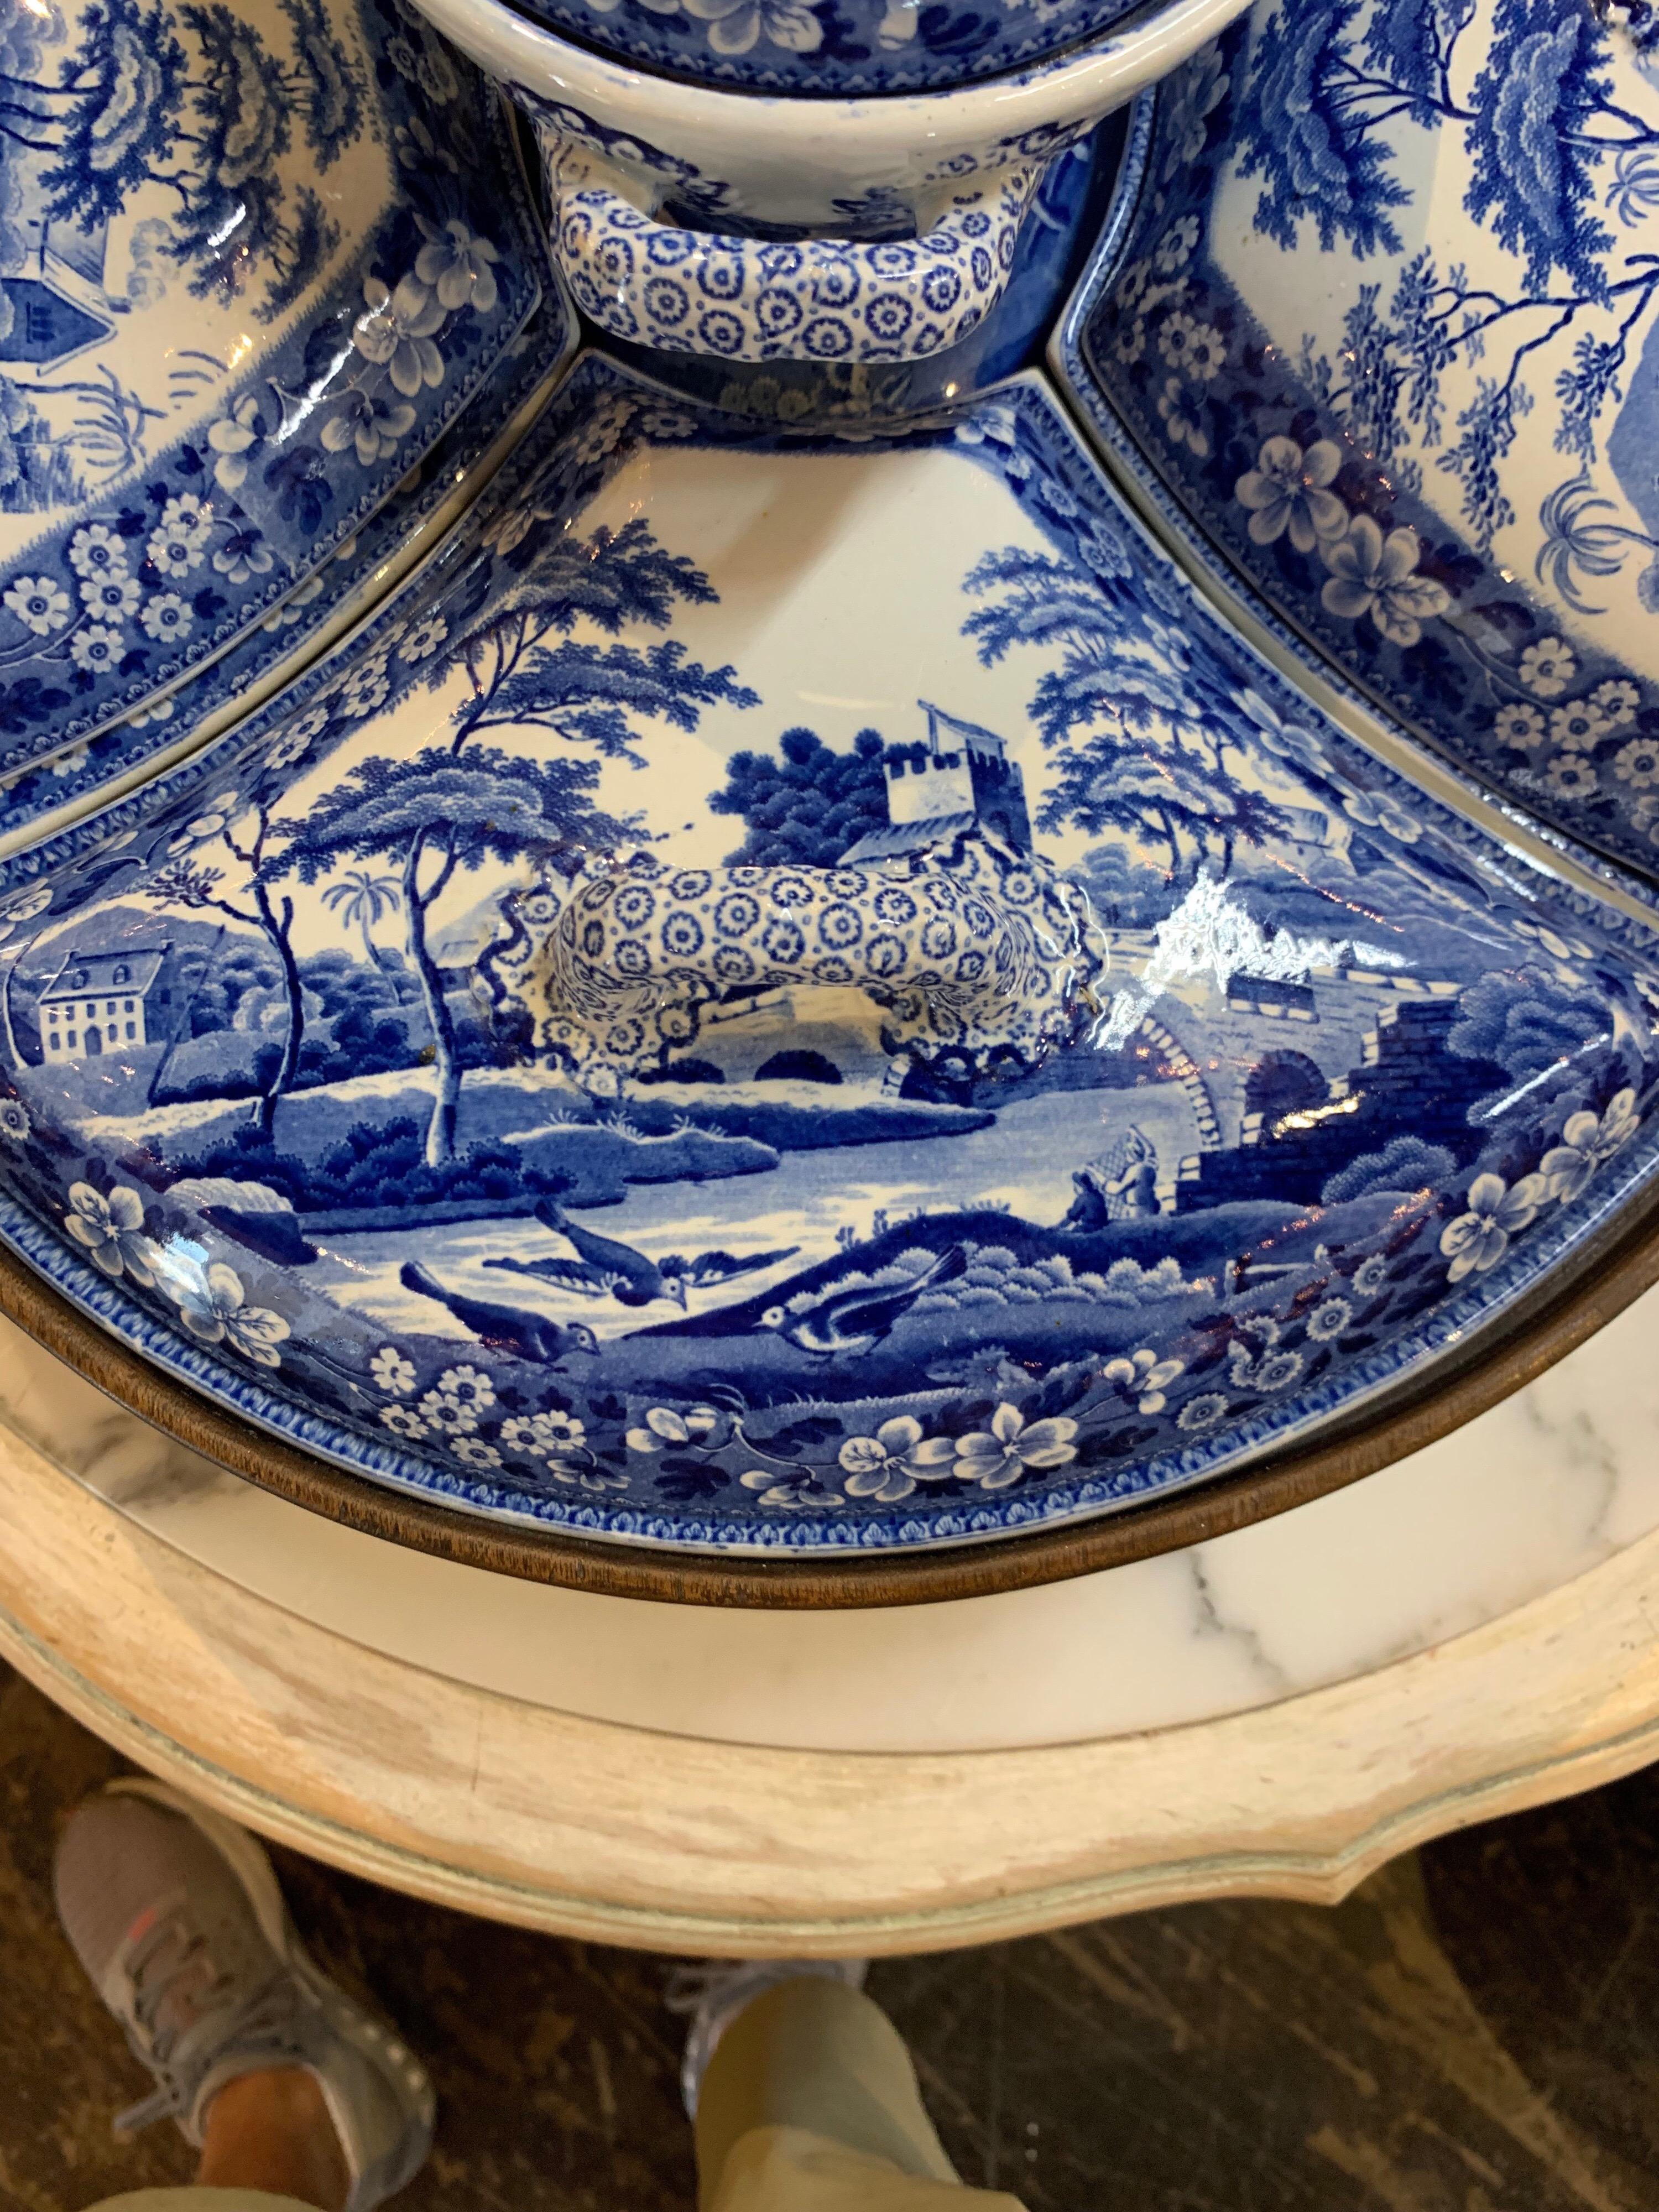 Very unique English porcelain Lazy Susan in nice blue and white pattern with Asian images. There are 4 serving sections on the bottom and the top section contains small cordial glasses. This piece is beautiful for a centerpiece, but functional as